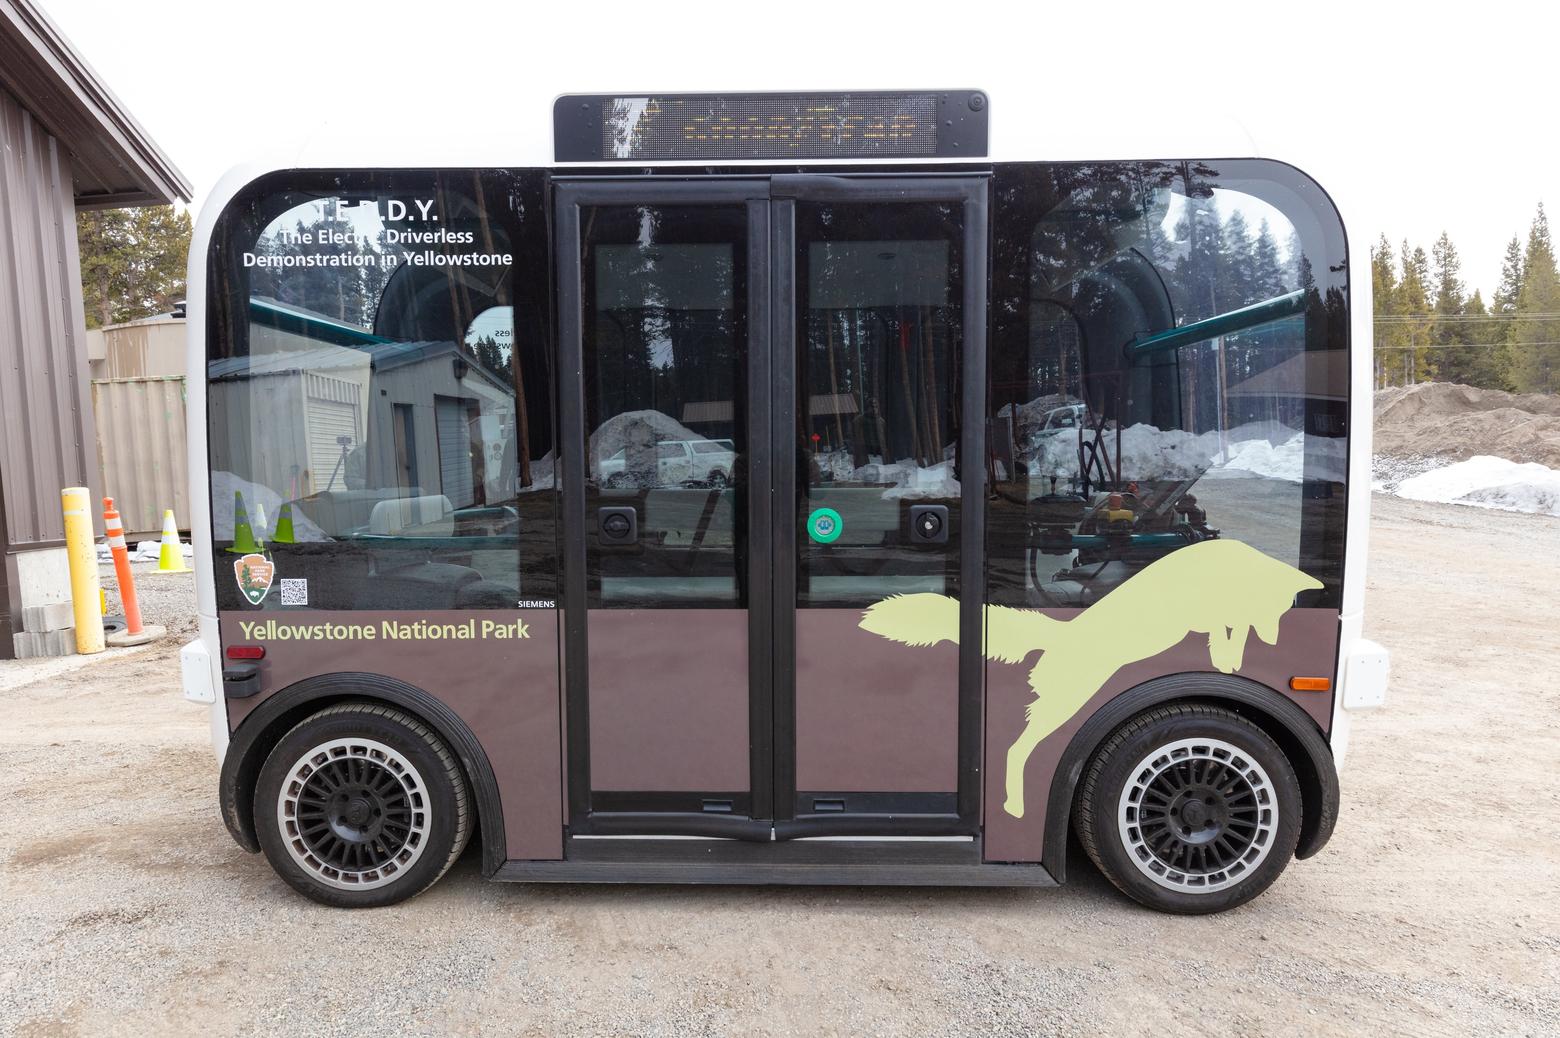 Meet T.E.D.D.Y., a driverless shuttle that will ferry you from Canyon Village to the edge of the Grand Canyon of the Yellowstone. The acronym stands for "The Electric Driverless Demonstration in Yellowstone" and is one of the experiments happening with alternative transportation to address crowds and separating visitors from individual vehicles. Could a bus system make a difference? But where would all the people driving to Yellowstone park? Photo courtesy Jacob W. Frank/NPS